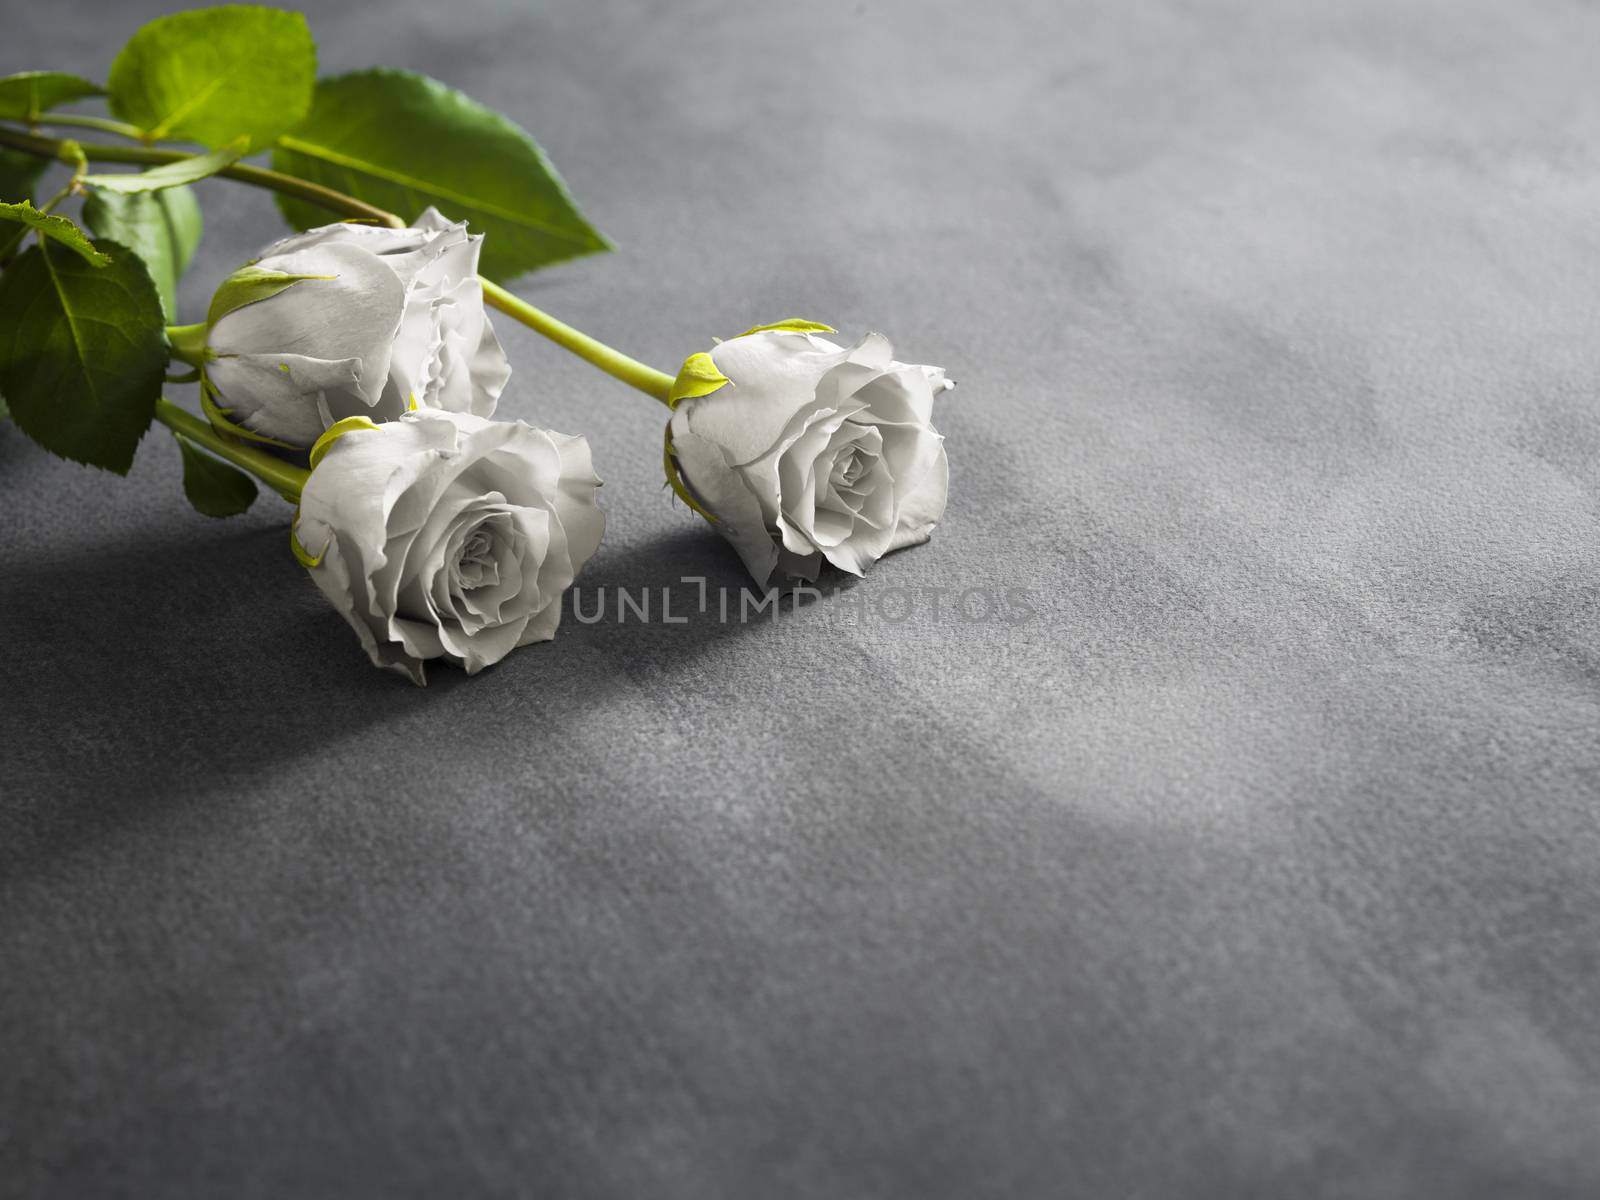 Funeral symbol. Beautiful white roses on a grey stone background. by Tjeerdkruse